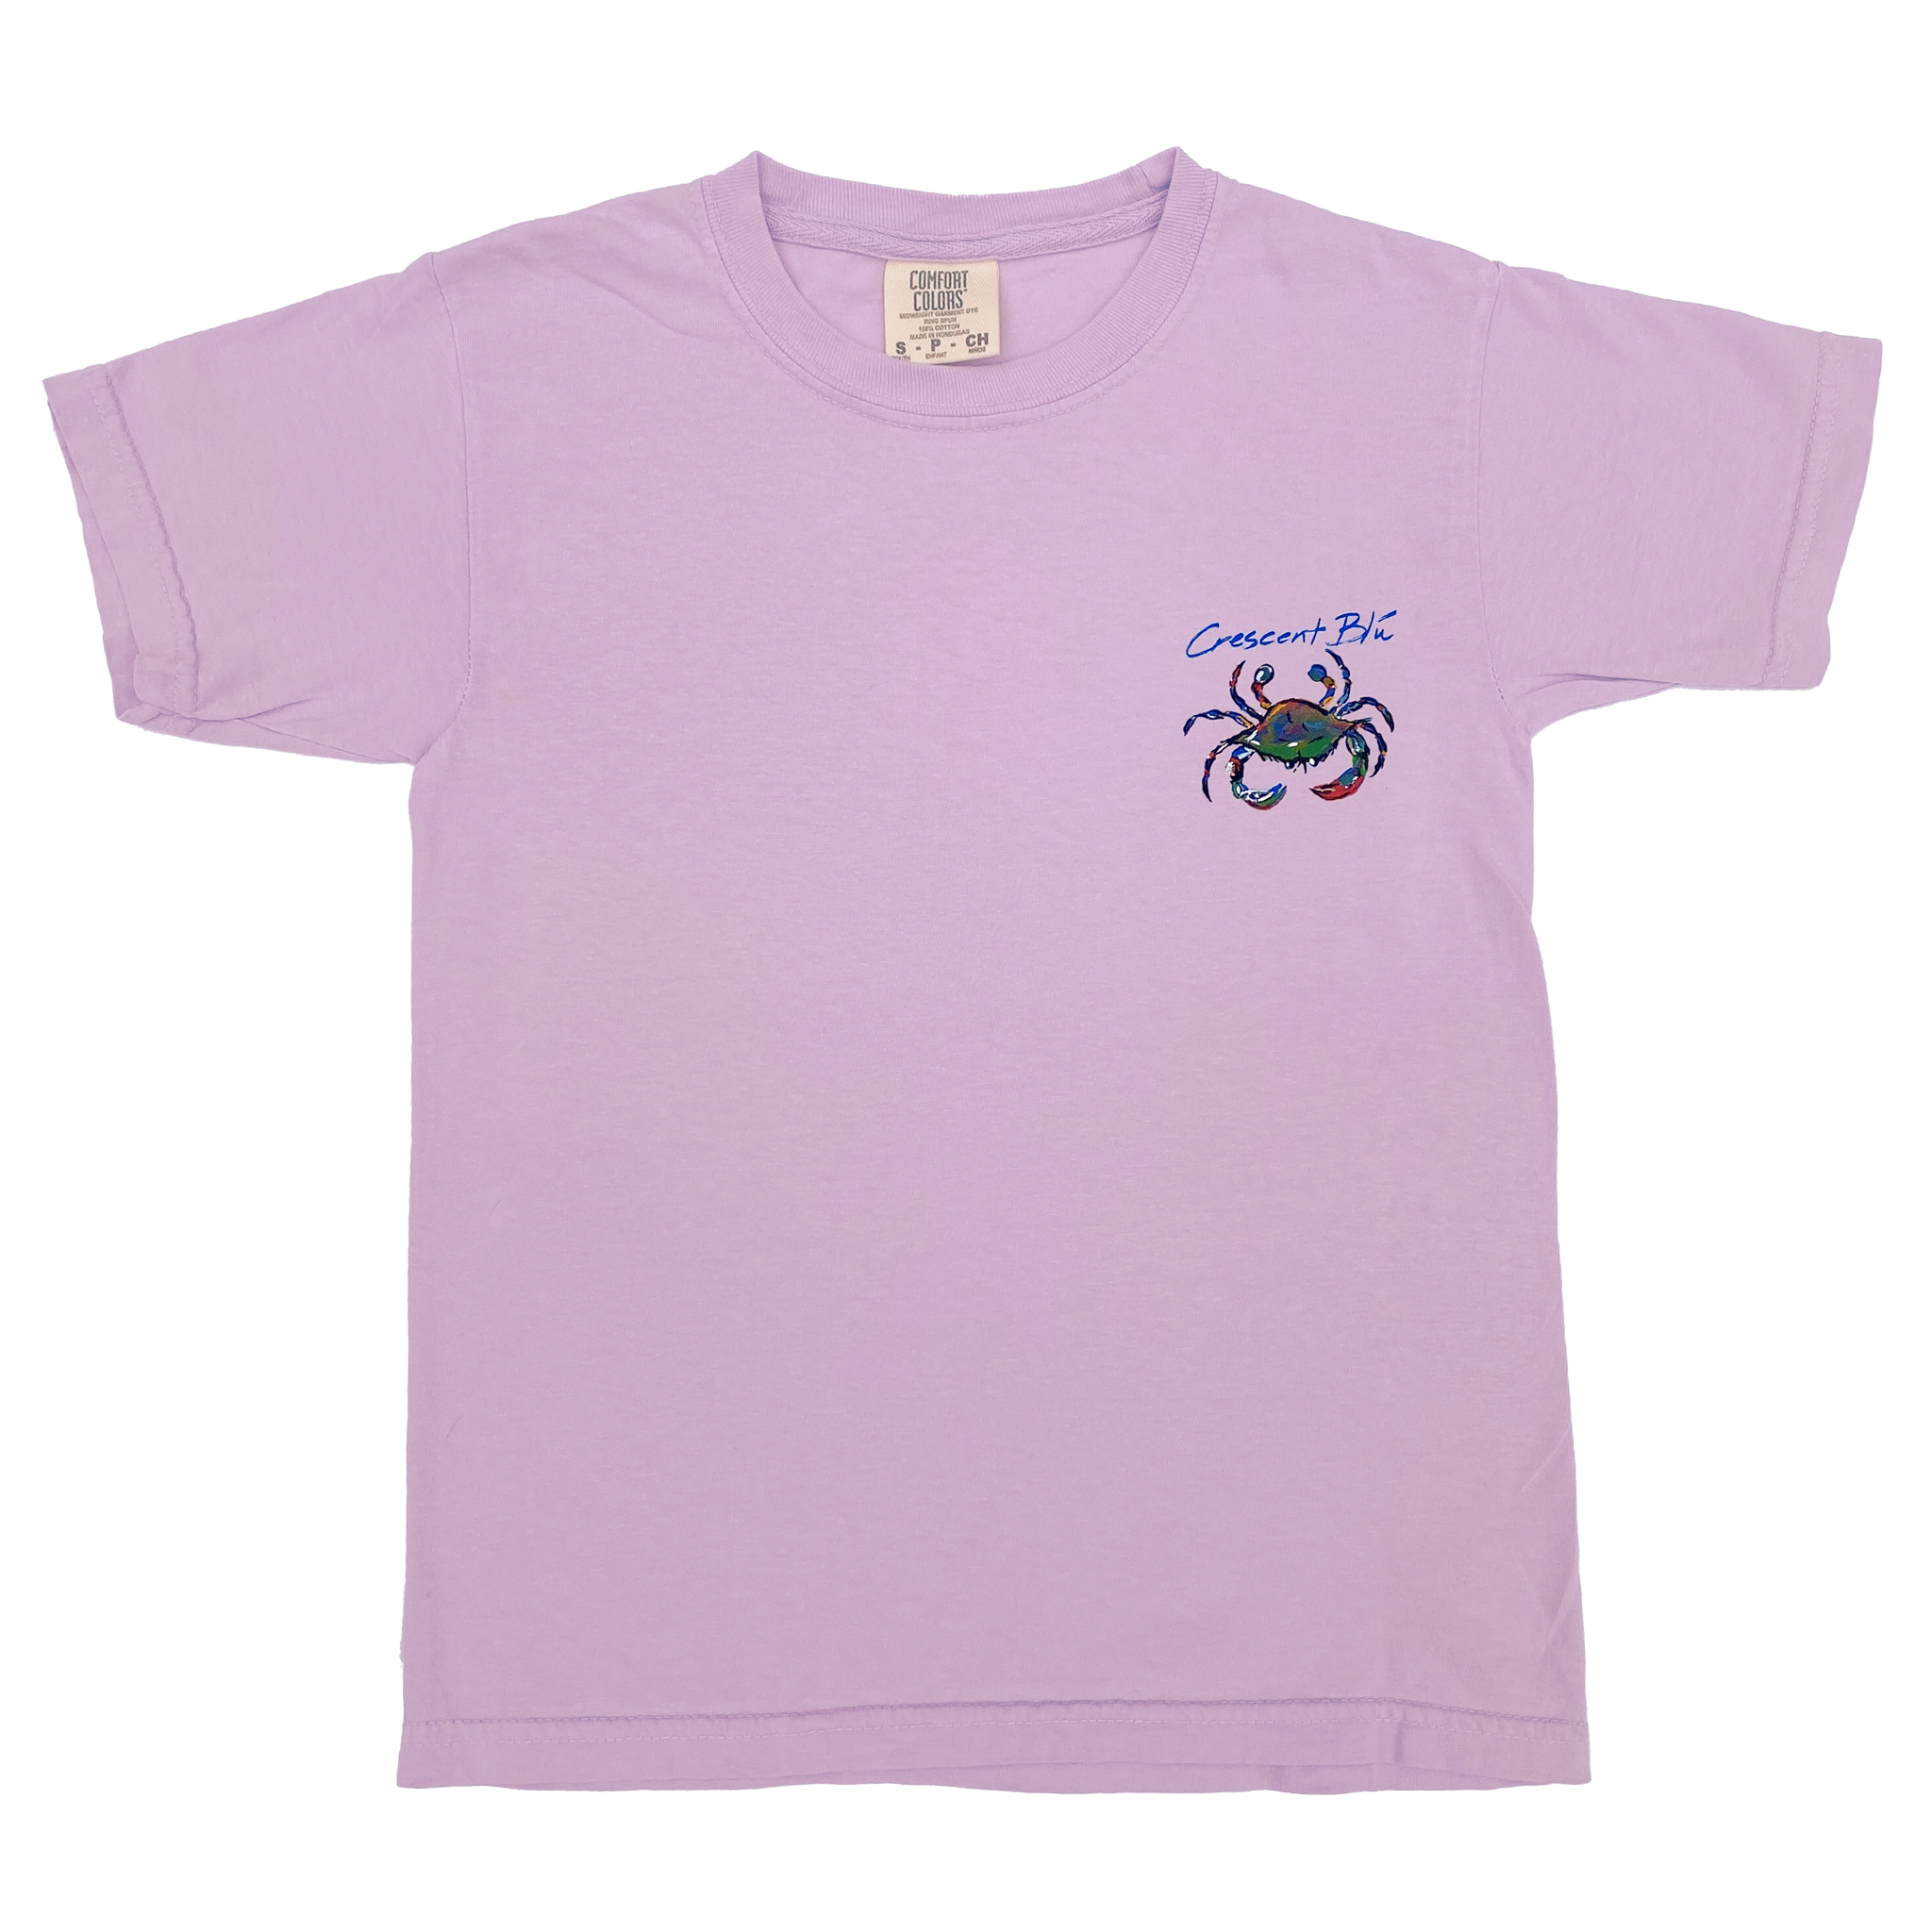 childs orchid shirt presenting a colorful crab on upper left chest